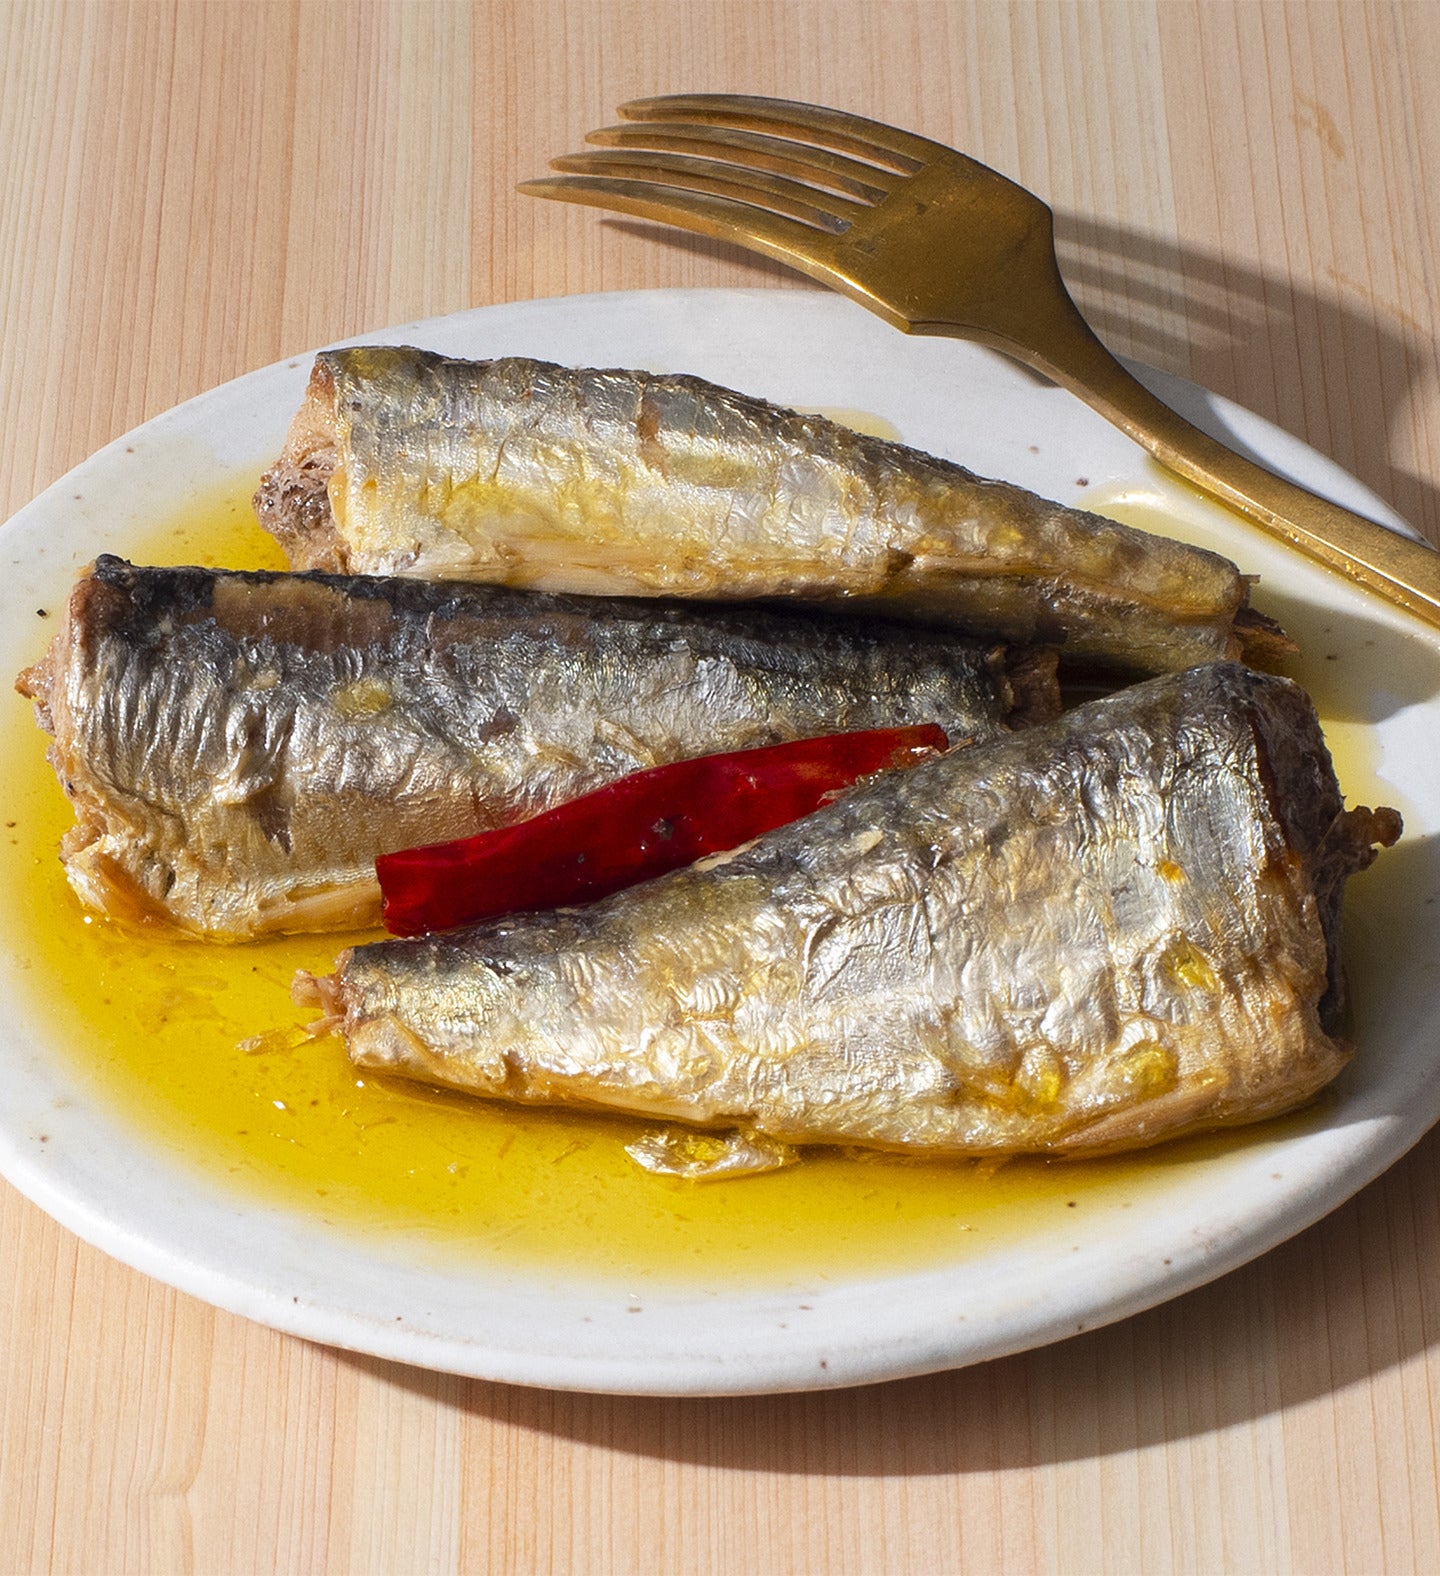 Wild Sardines with Olive Oil & Red Chili Pepper